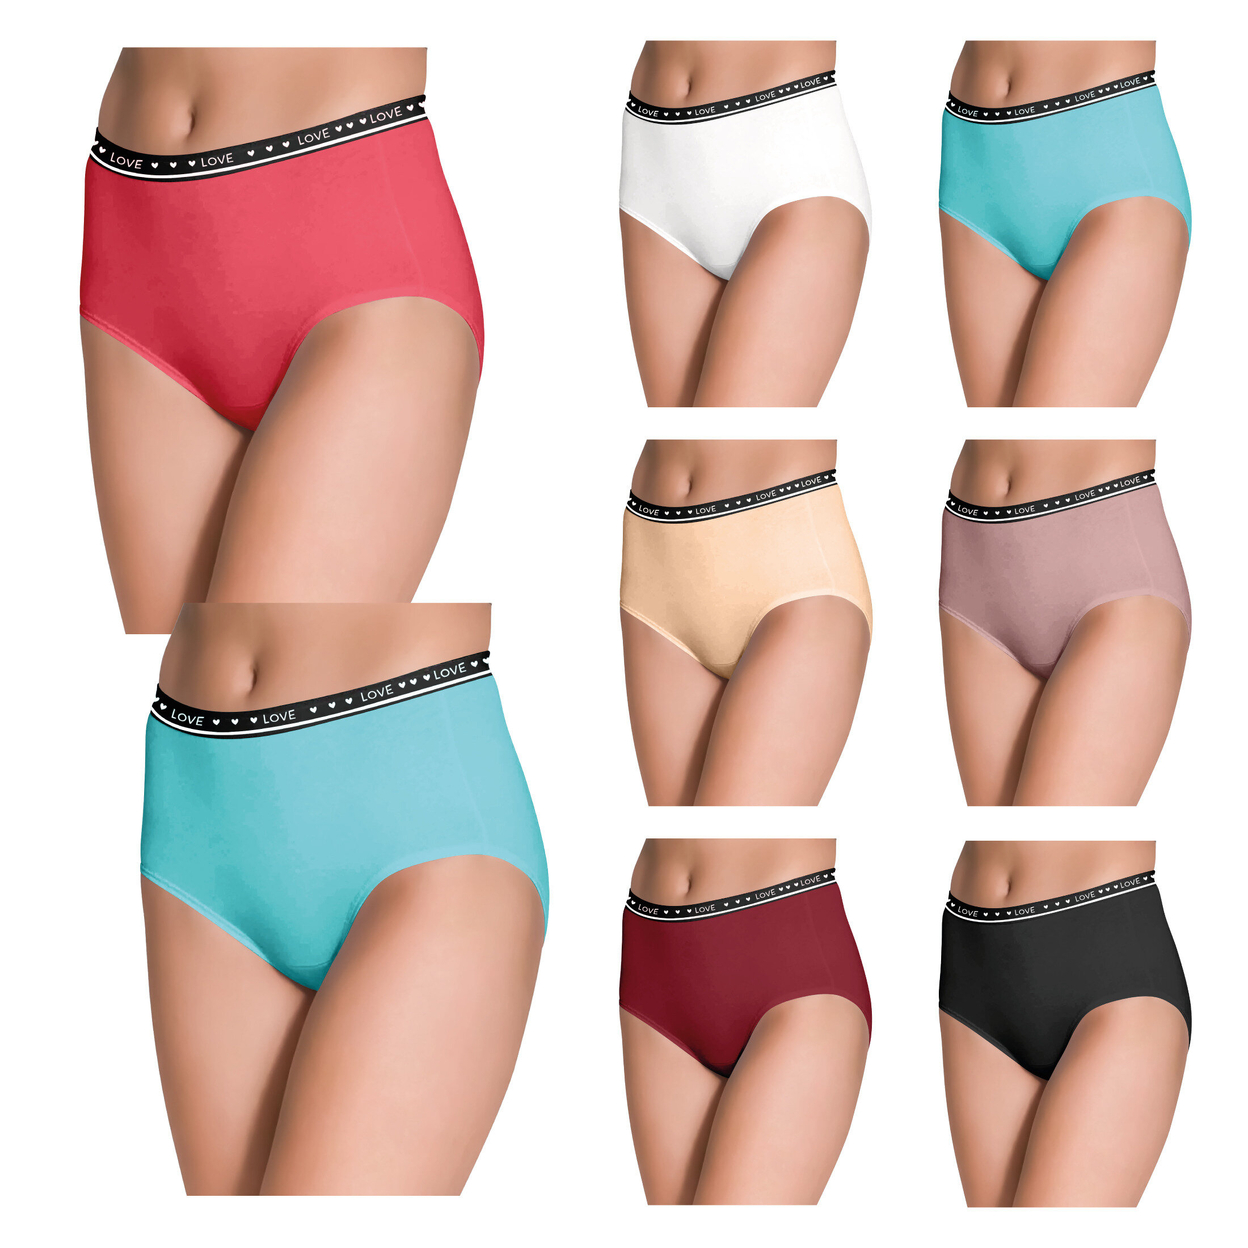 Multi-Pack: Women's Ultra Soft Moisture Wicking Panties Cotton Perfect Fit Underwear (Plus Sizes Available) - 6-Pack, Small